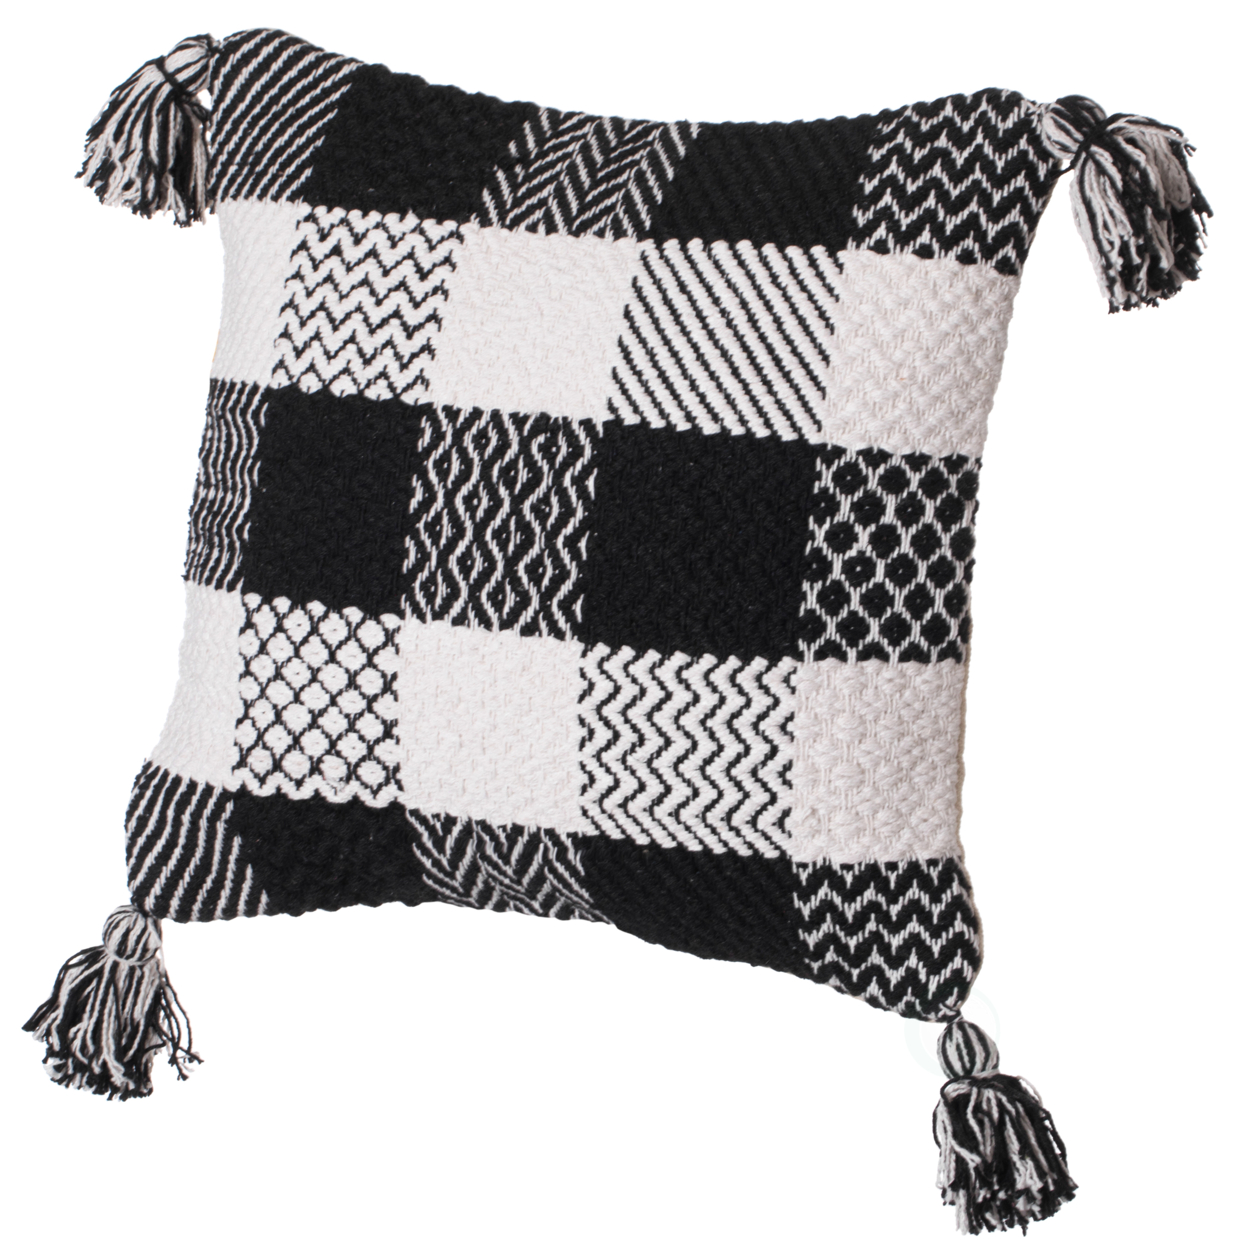 16 Handwoven Cotton Throw Pillow Cover Chevron & Gingham Design Black & White - Gingham With Cushion